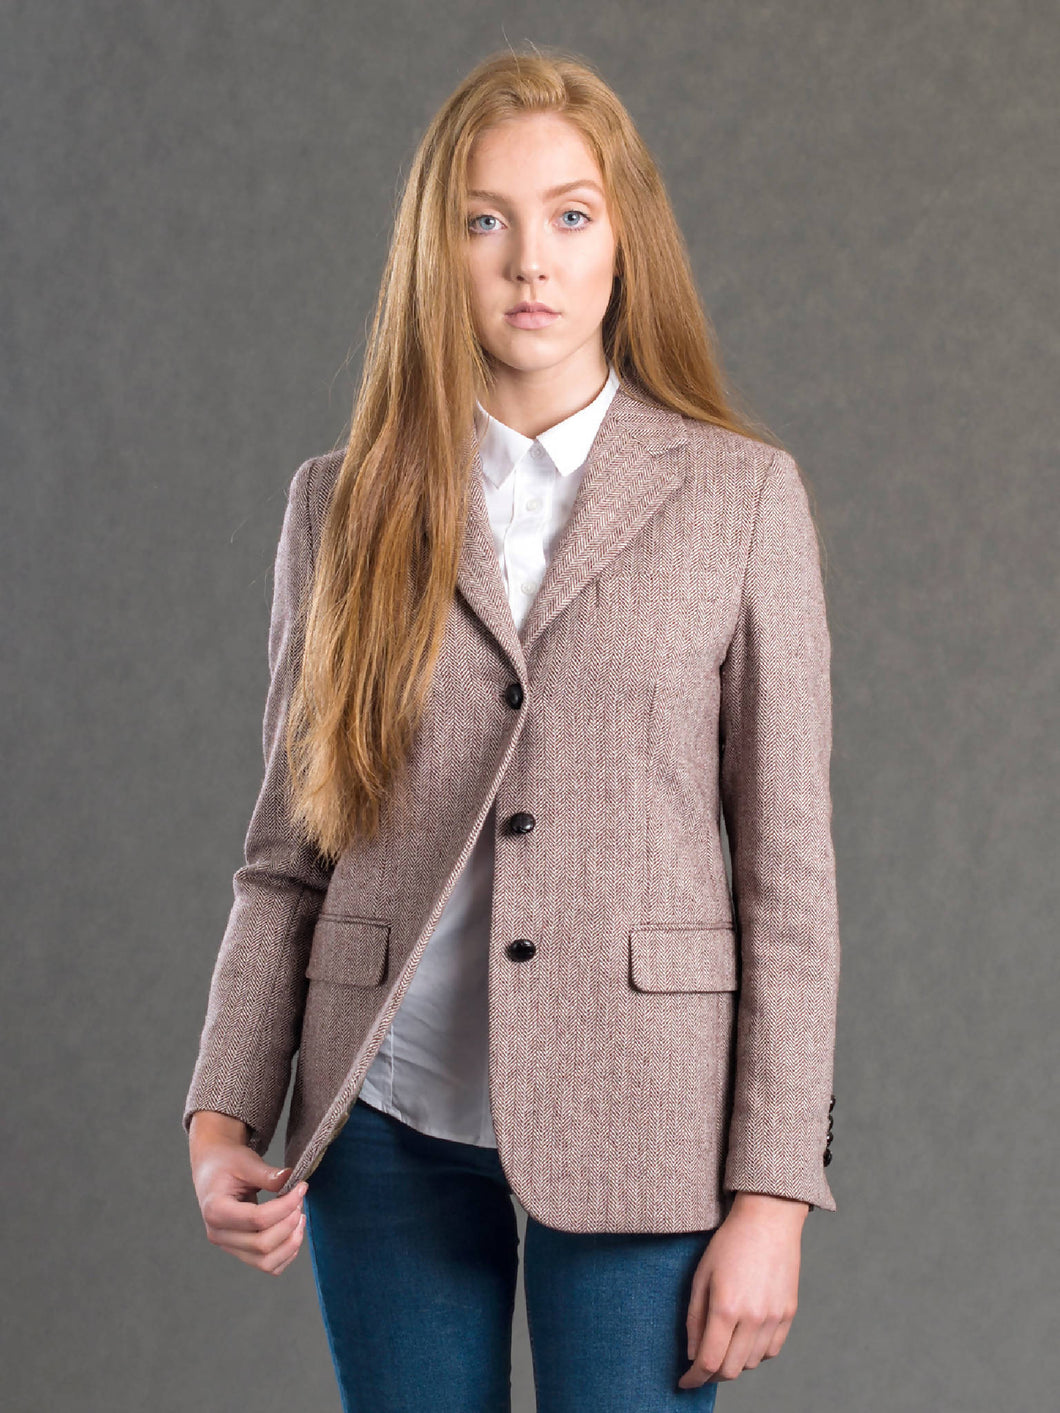 The Merrion Jacket